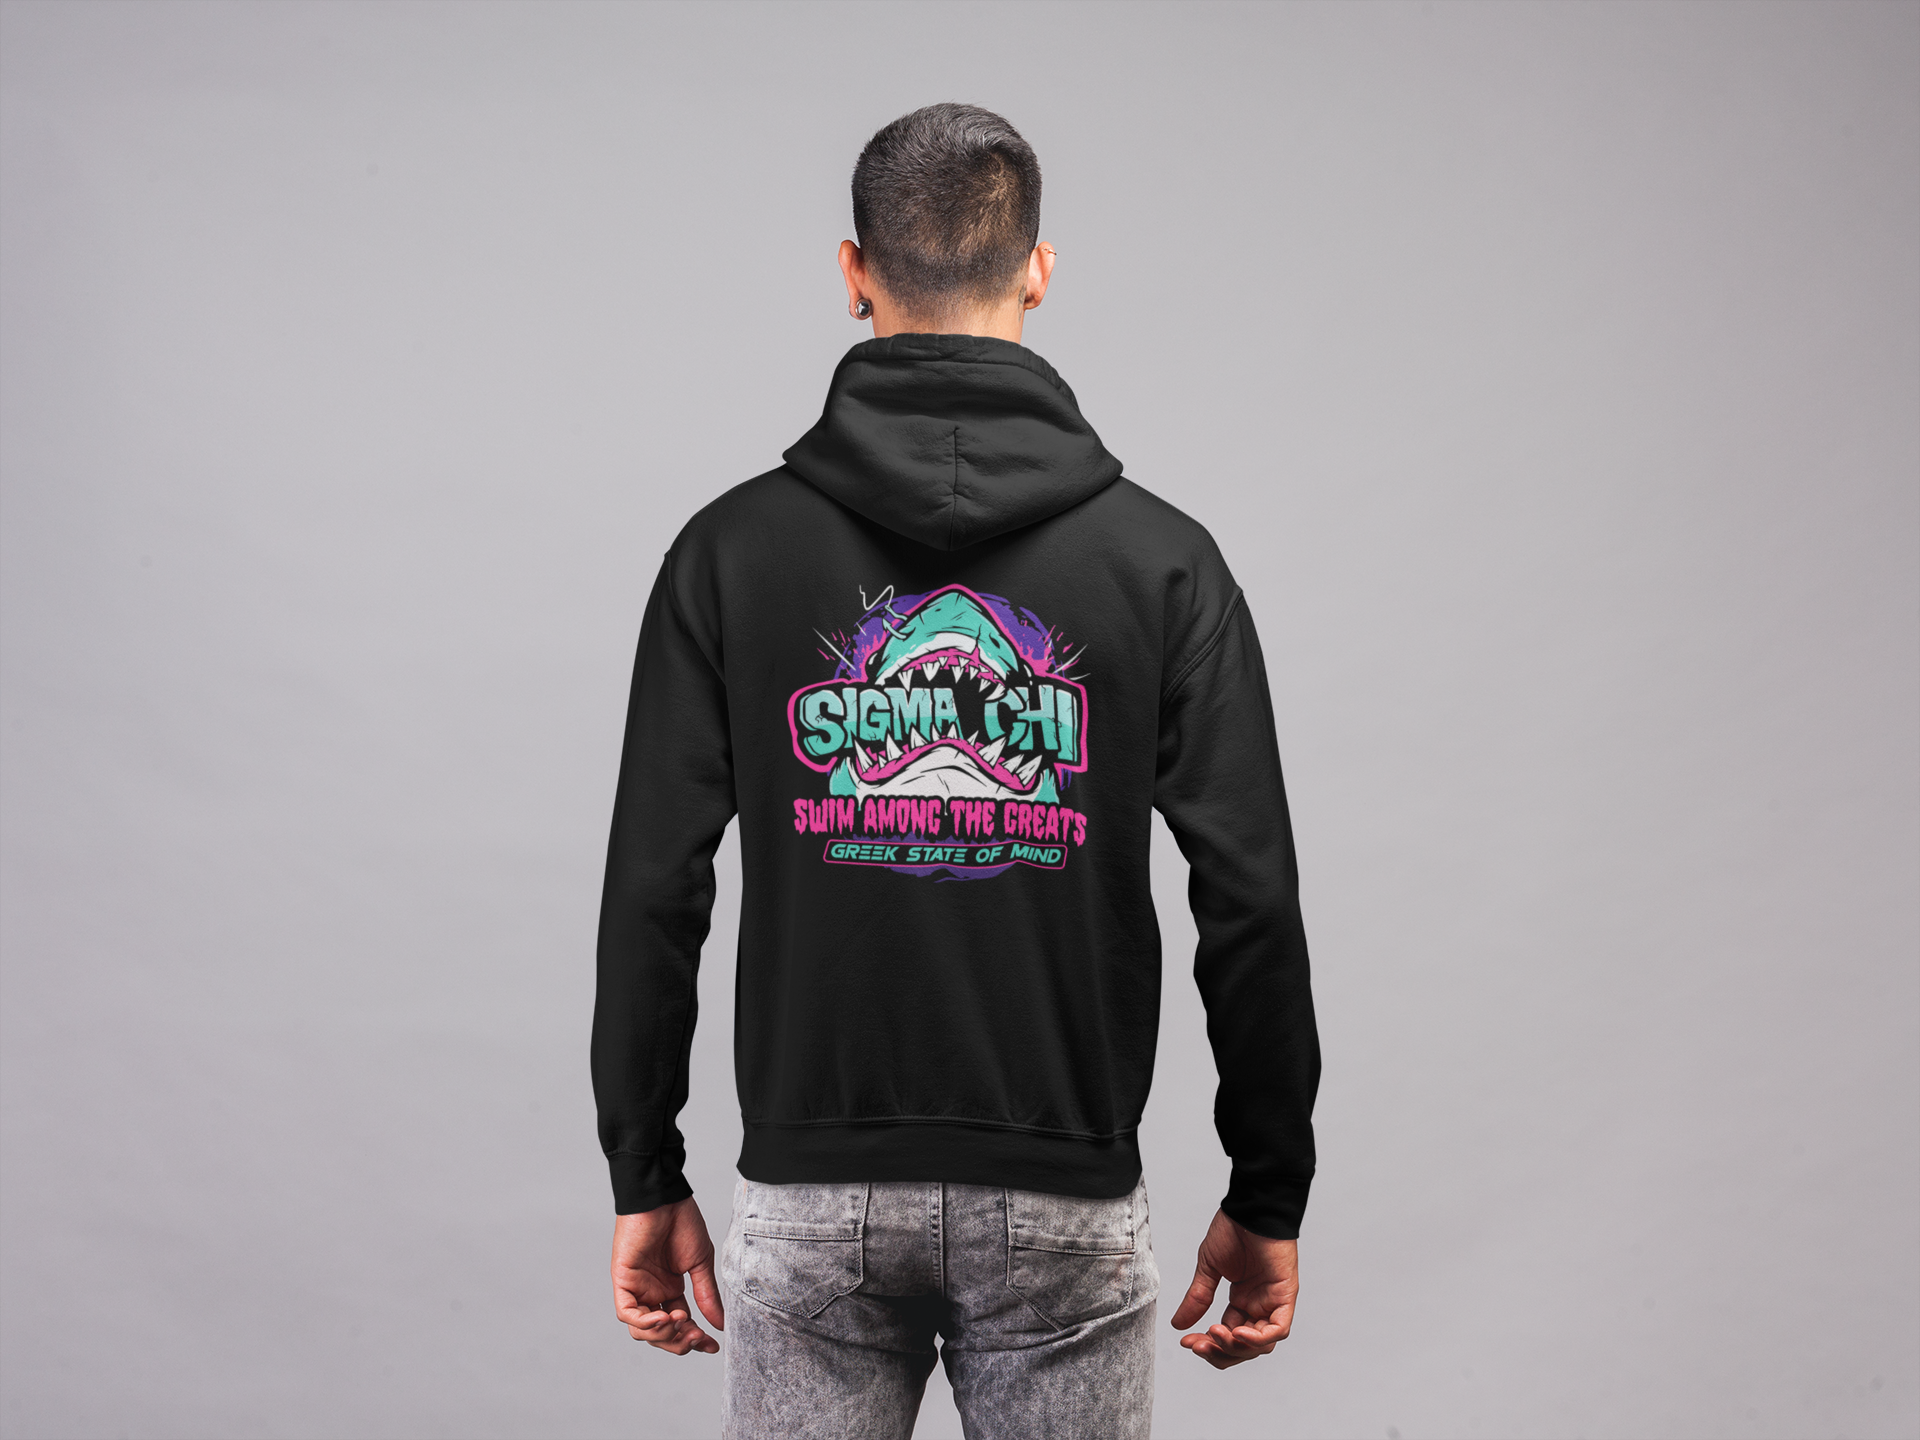 BlackSigma Chi Graphic Hoodie | The Deep End | Sigma Chi Fraternity Merch House back model